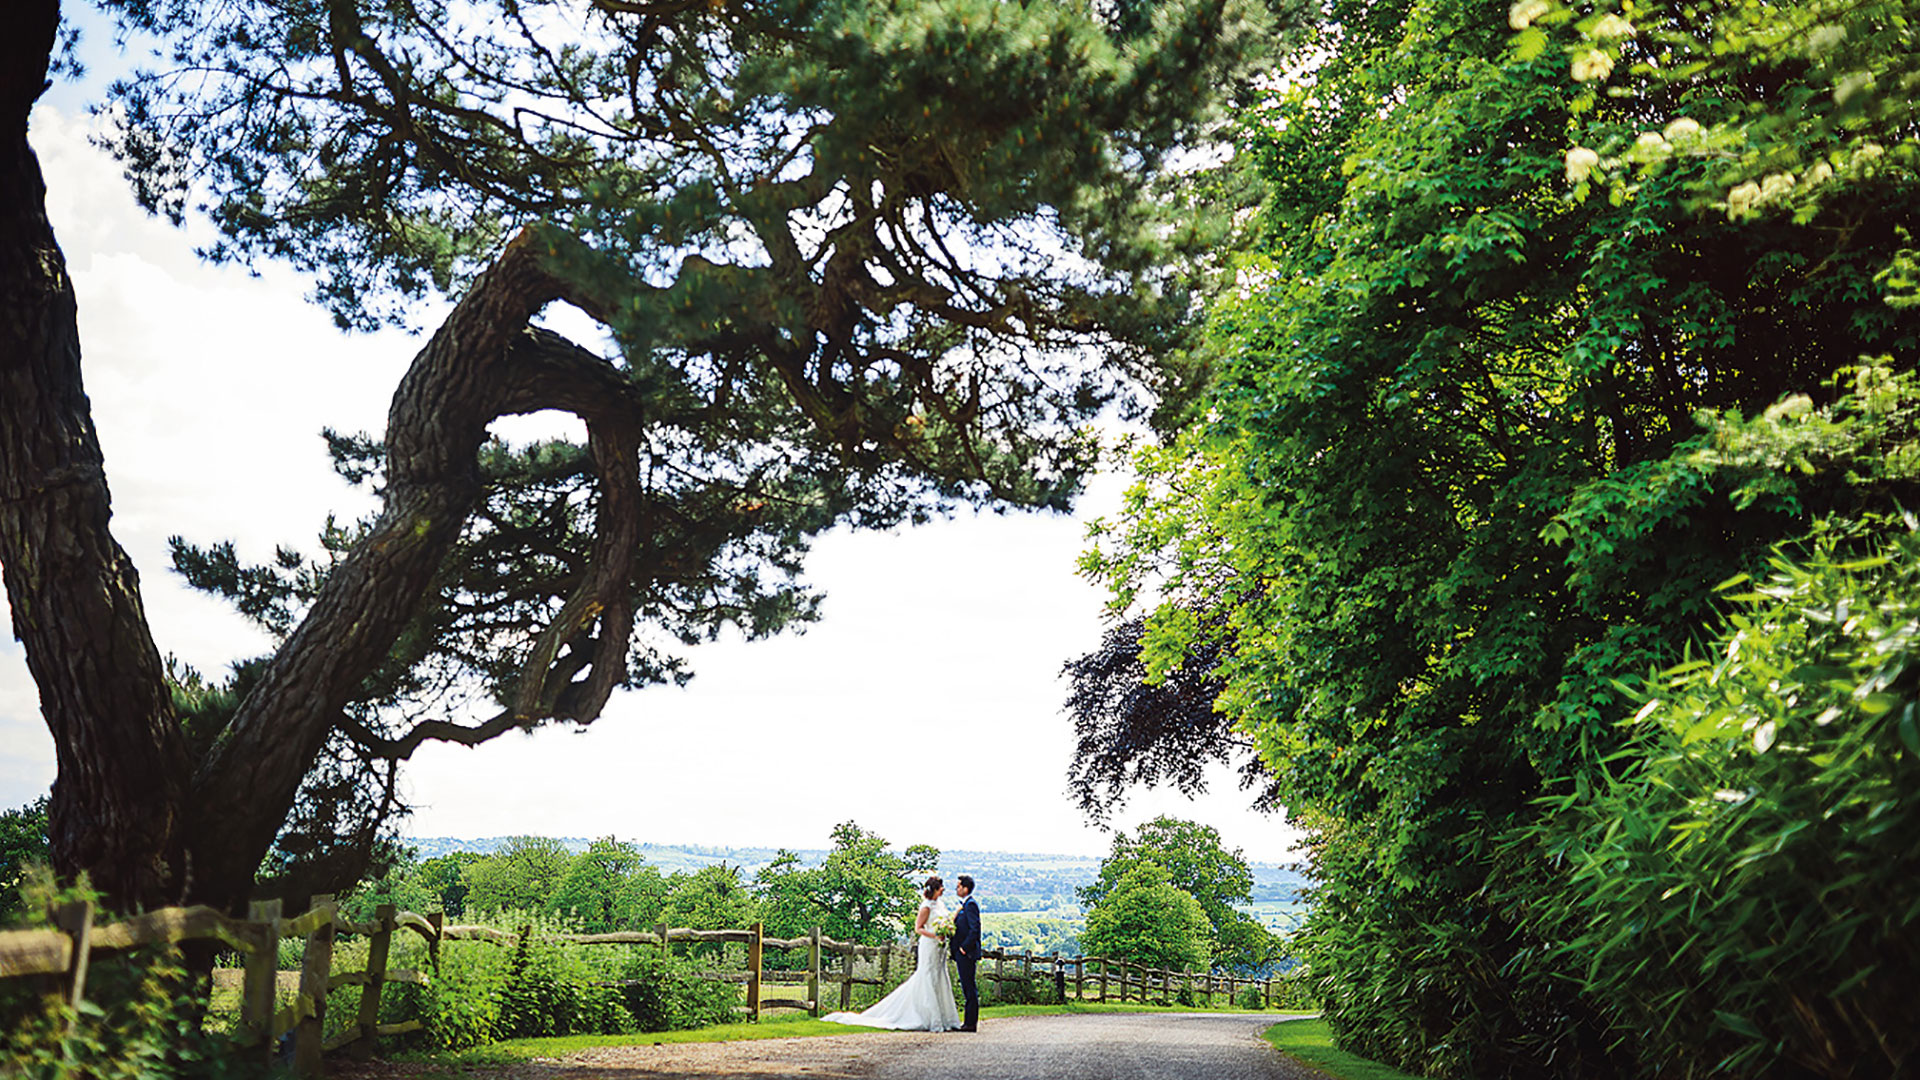 A couple steal a moment away on the entrance drive of this exquisite countryside wedding venue in Essex